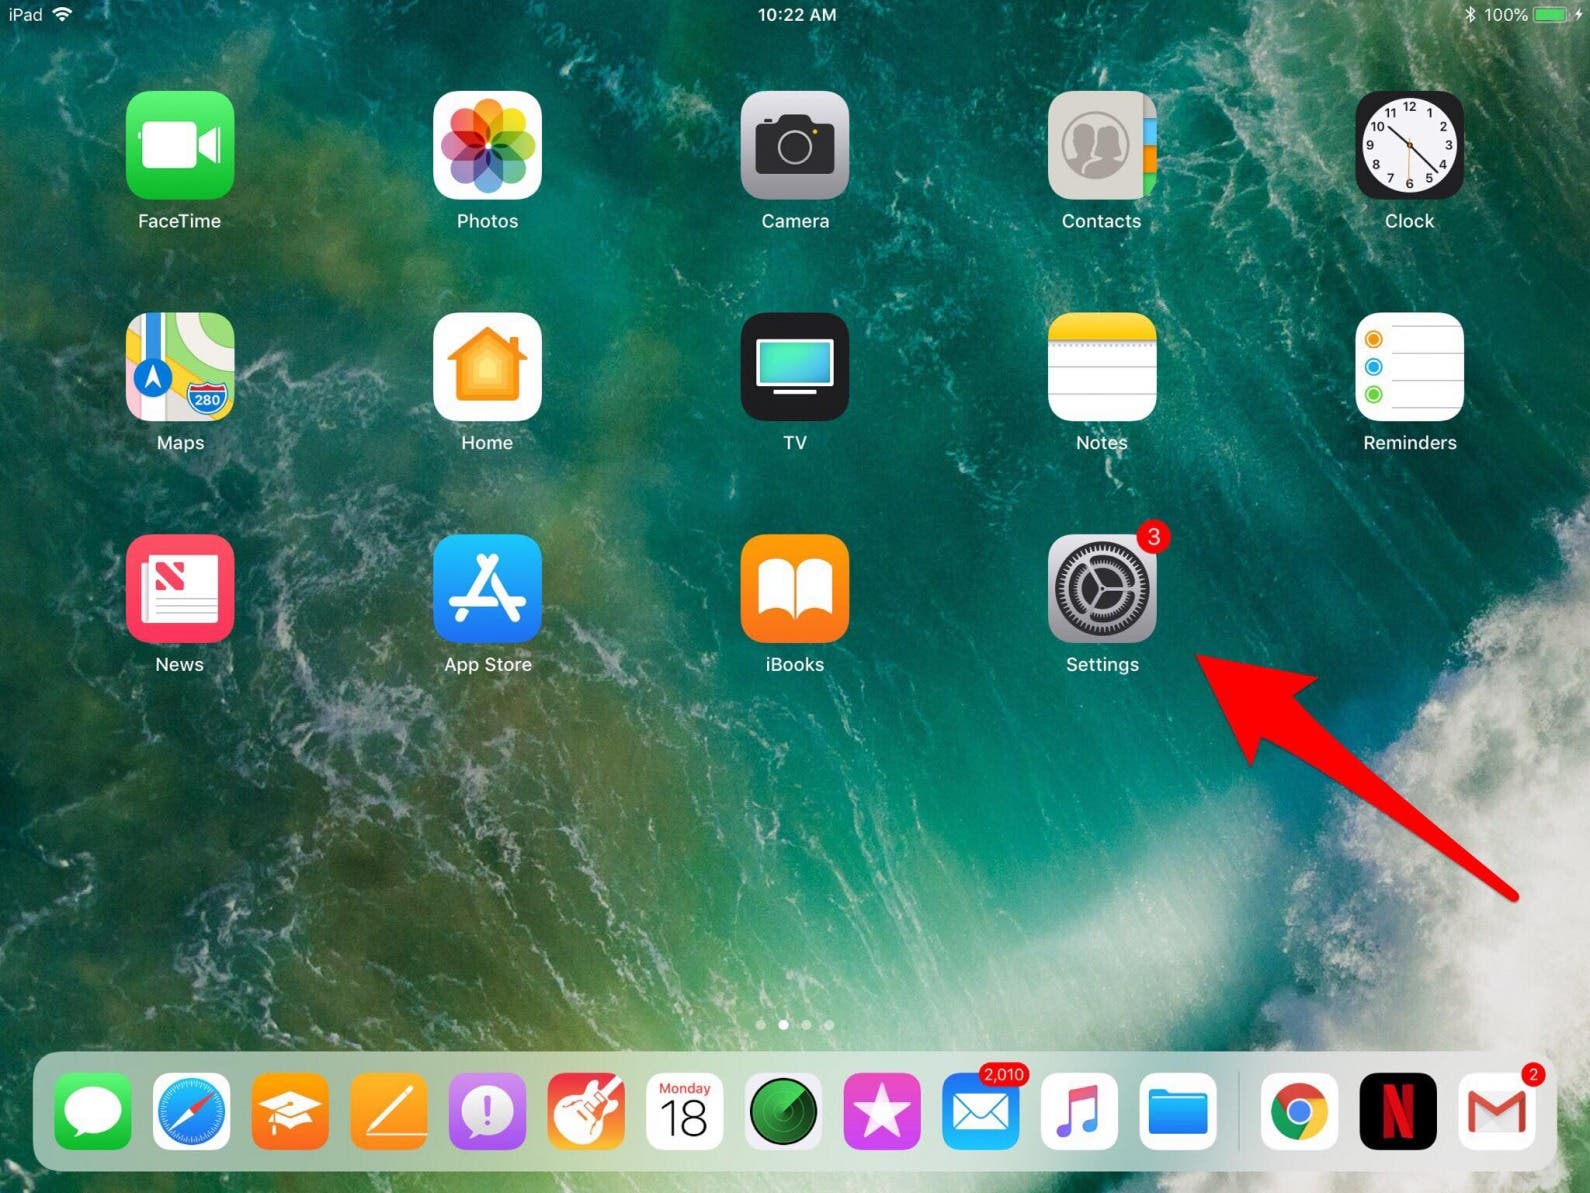 Delete Remove Uninstall How To Get Rid Of Apps On The Ipad